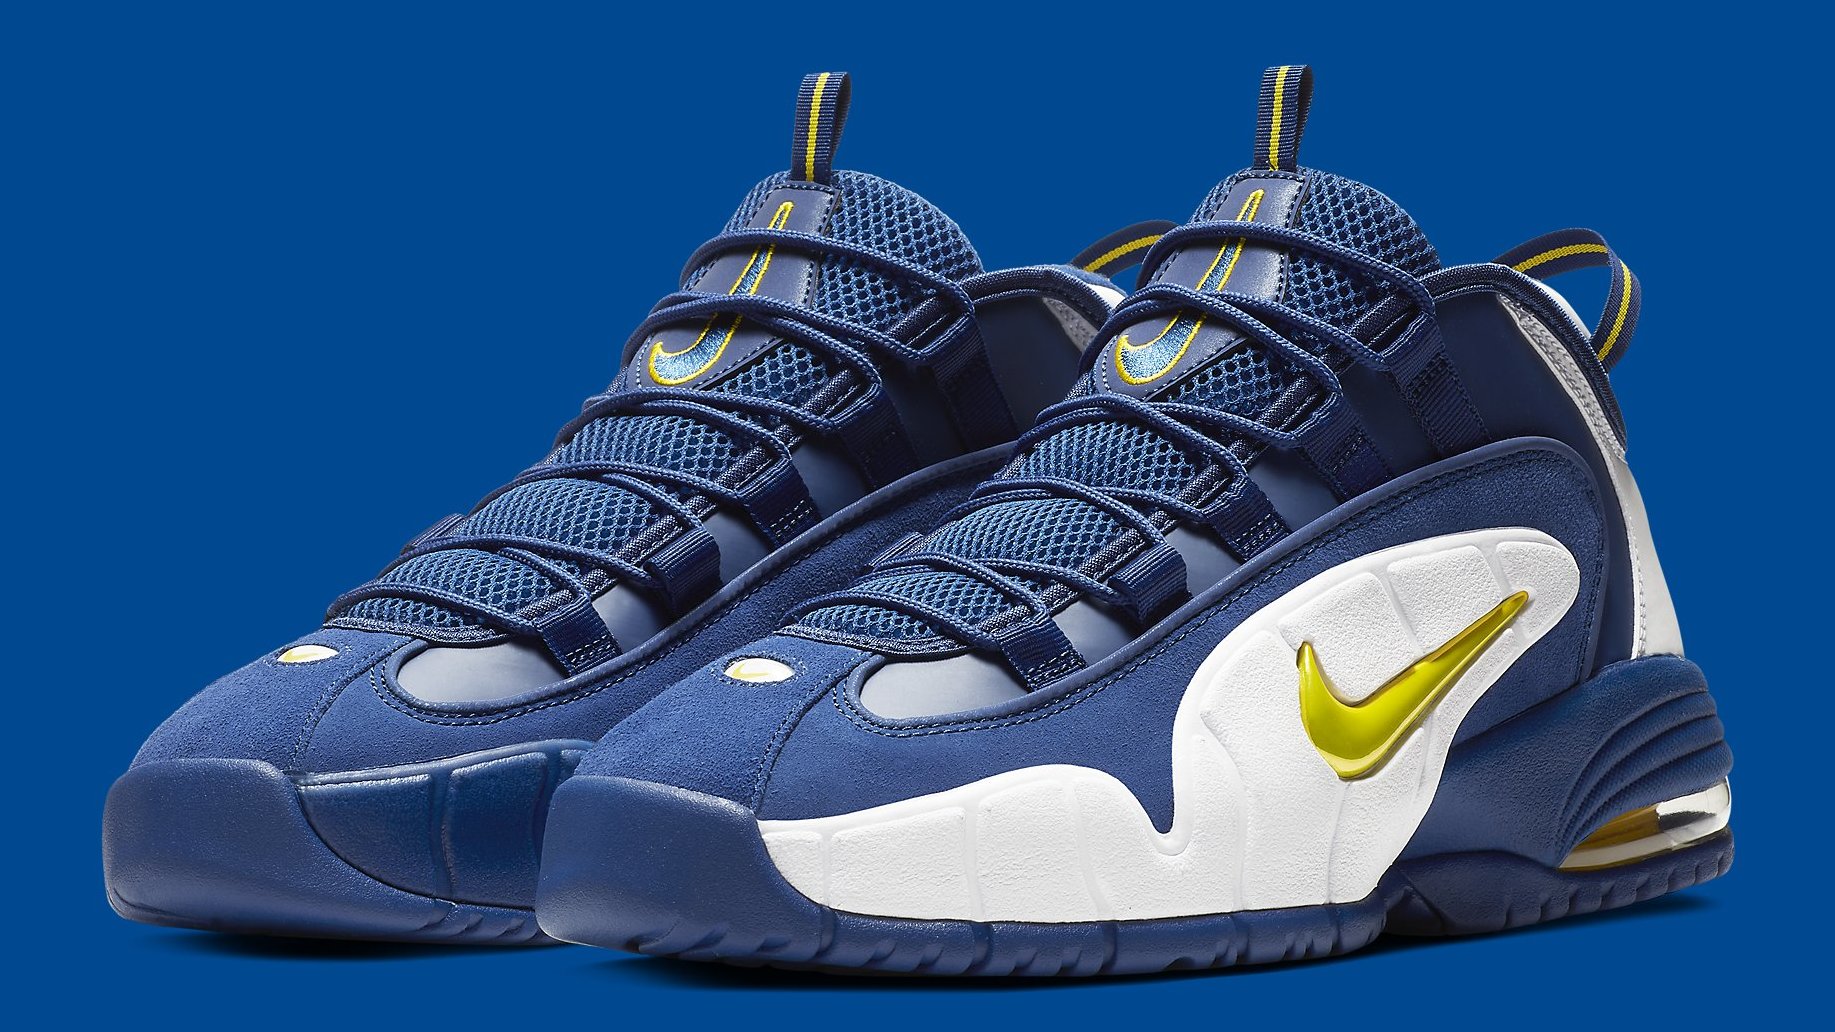 Nike Air Max Penny 1 Warriors Release Date 685153 401 Pair